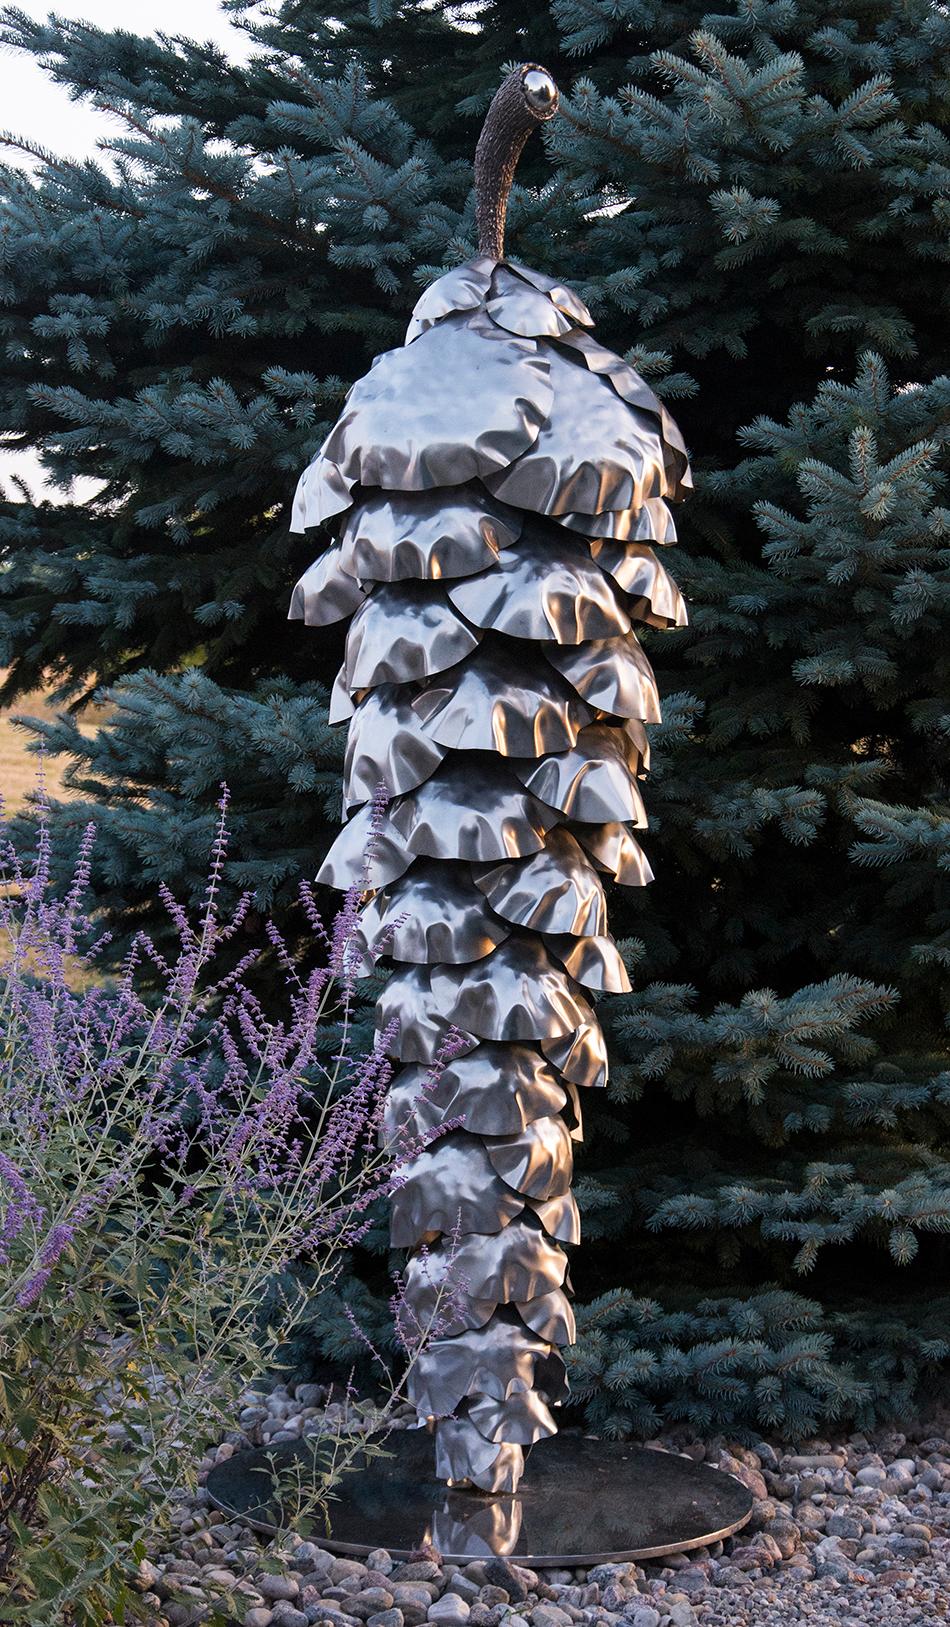 Floyd Elzinga Still-Life Sculpture - Balance - Pine Cone - large, nature inspired, stainless steel outdoor sculpture